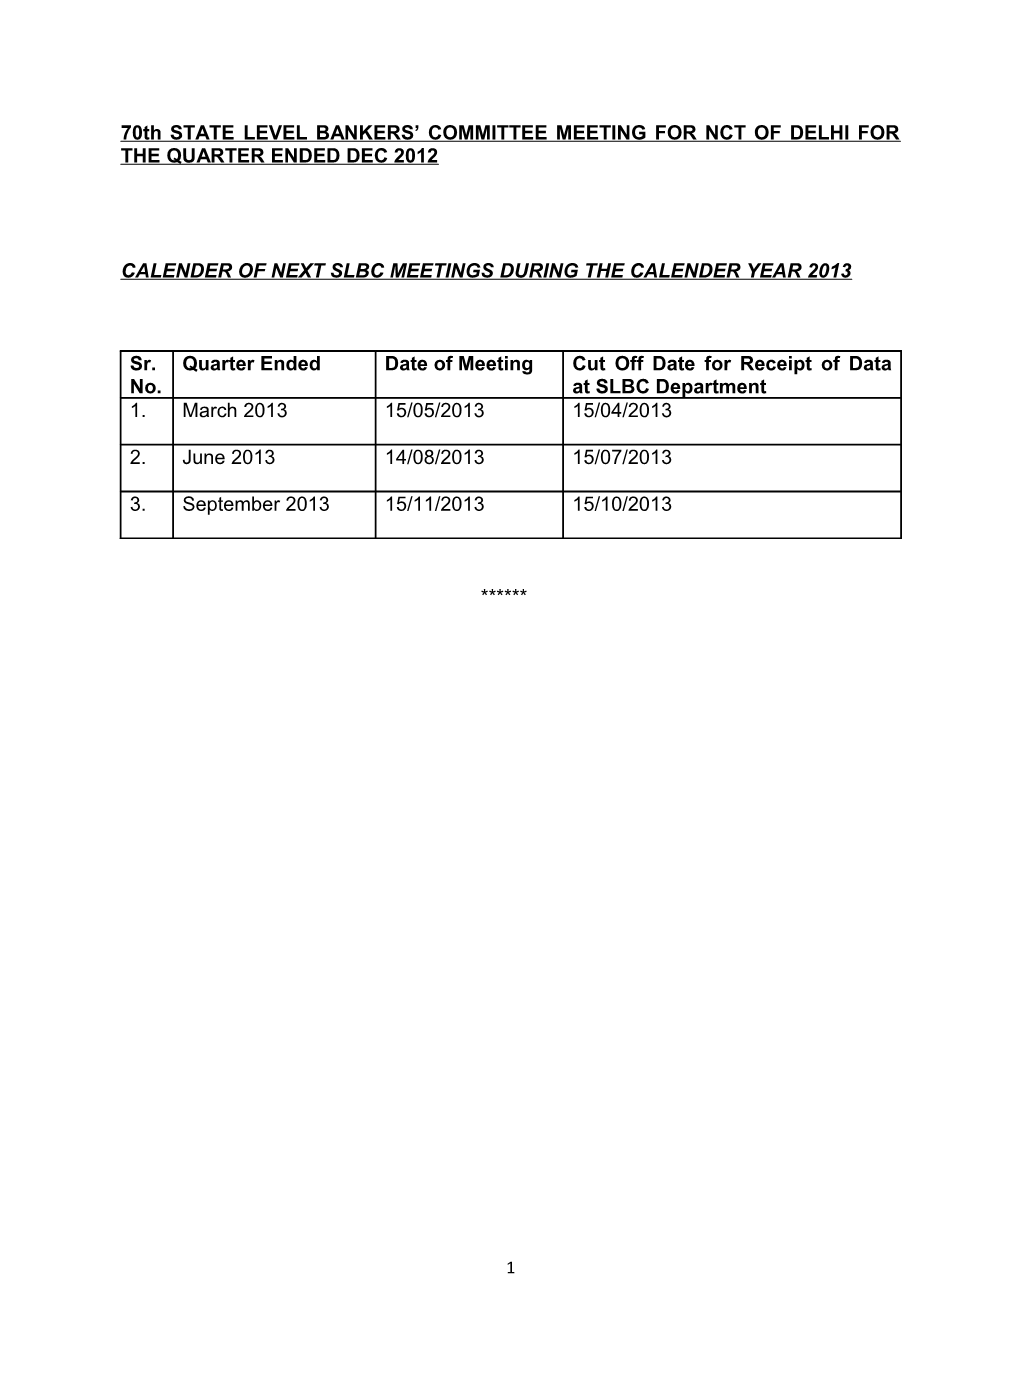 Calender of Next Slbc Meetings During the Calender Year 2013